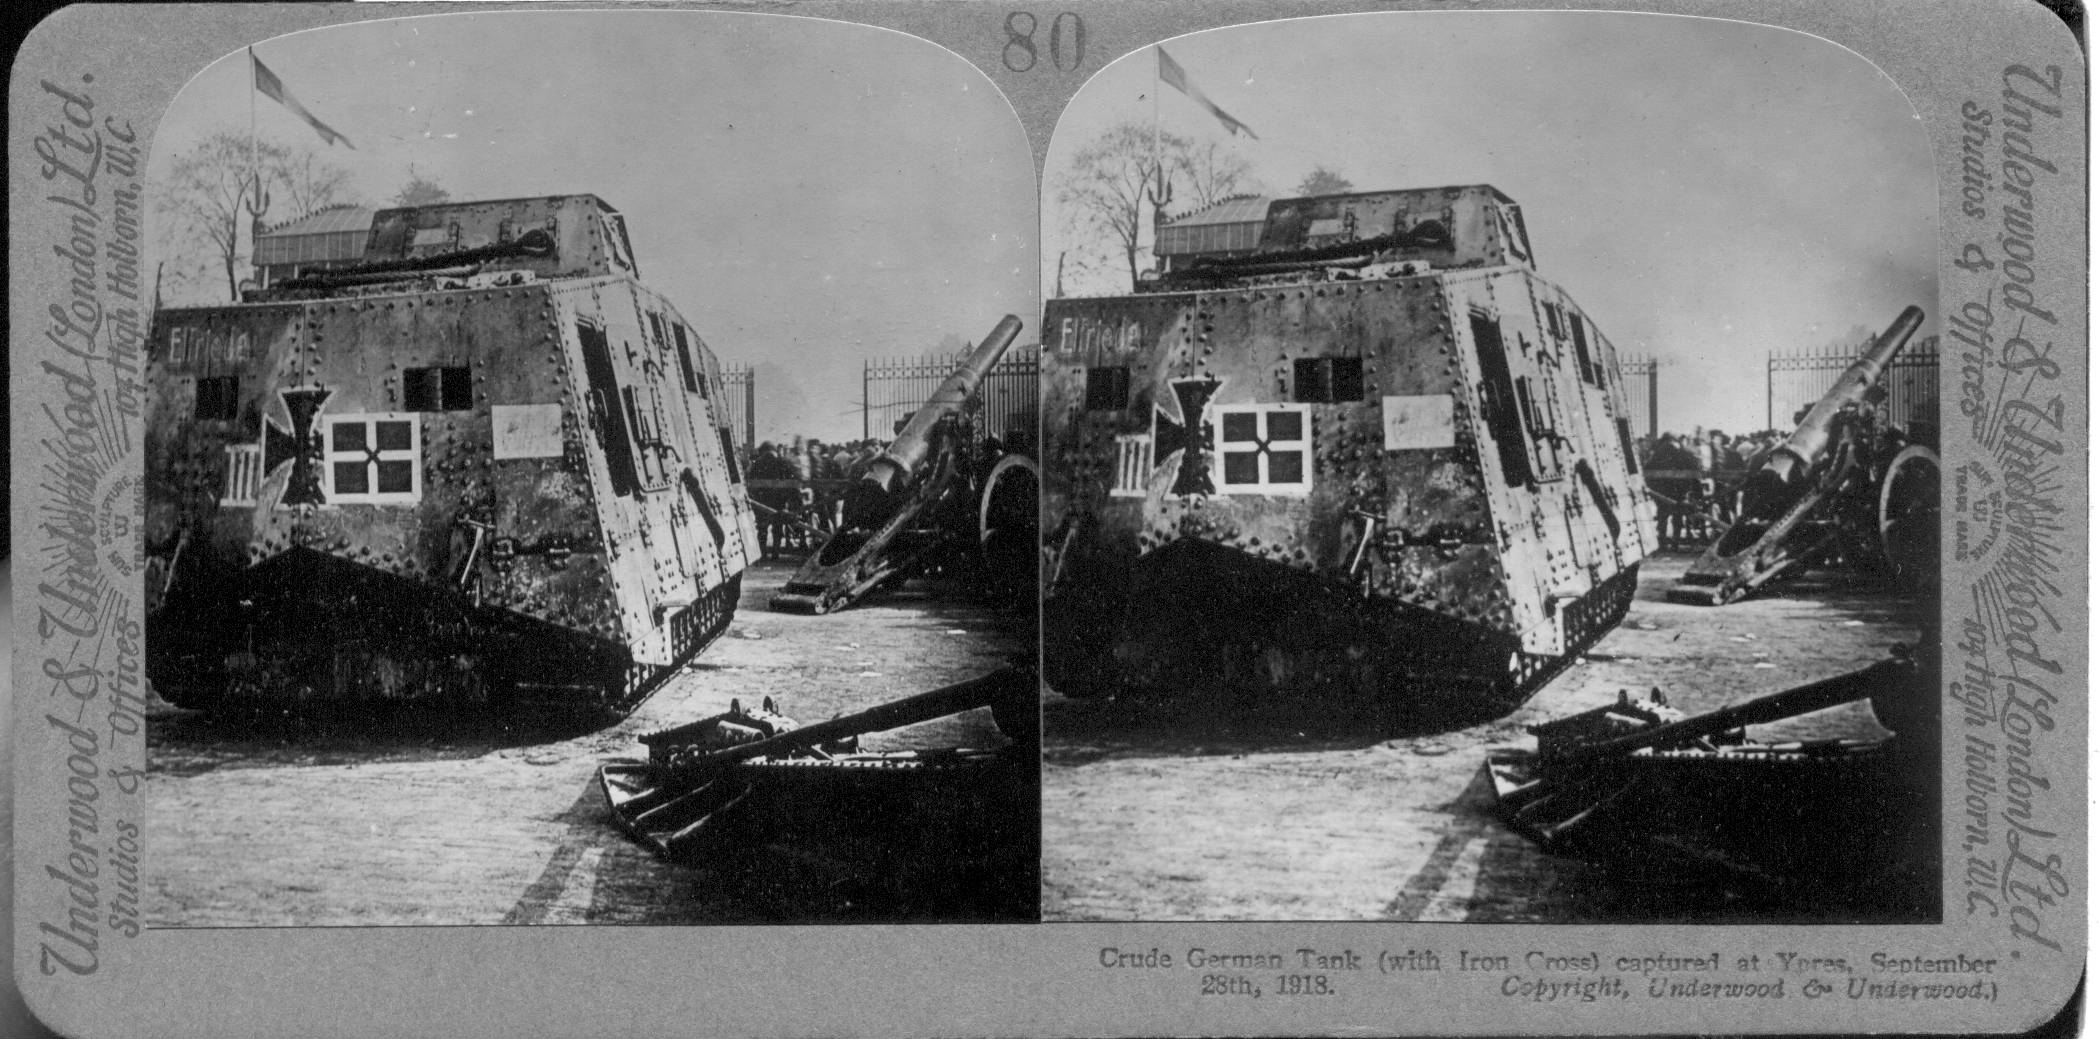 Crude German Tank (with Iron Cross) captured at Ypres, September 28th, 1918